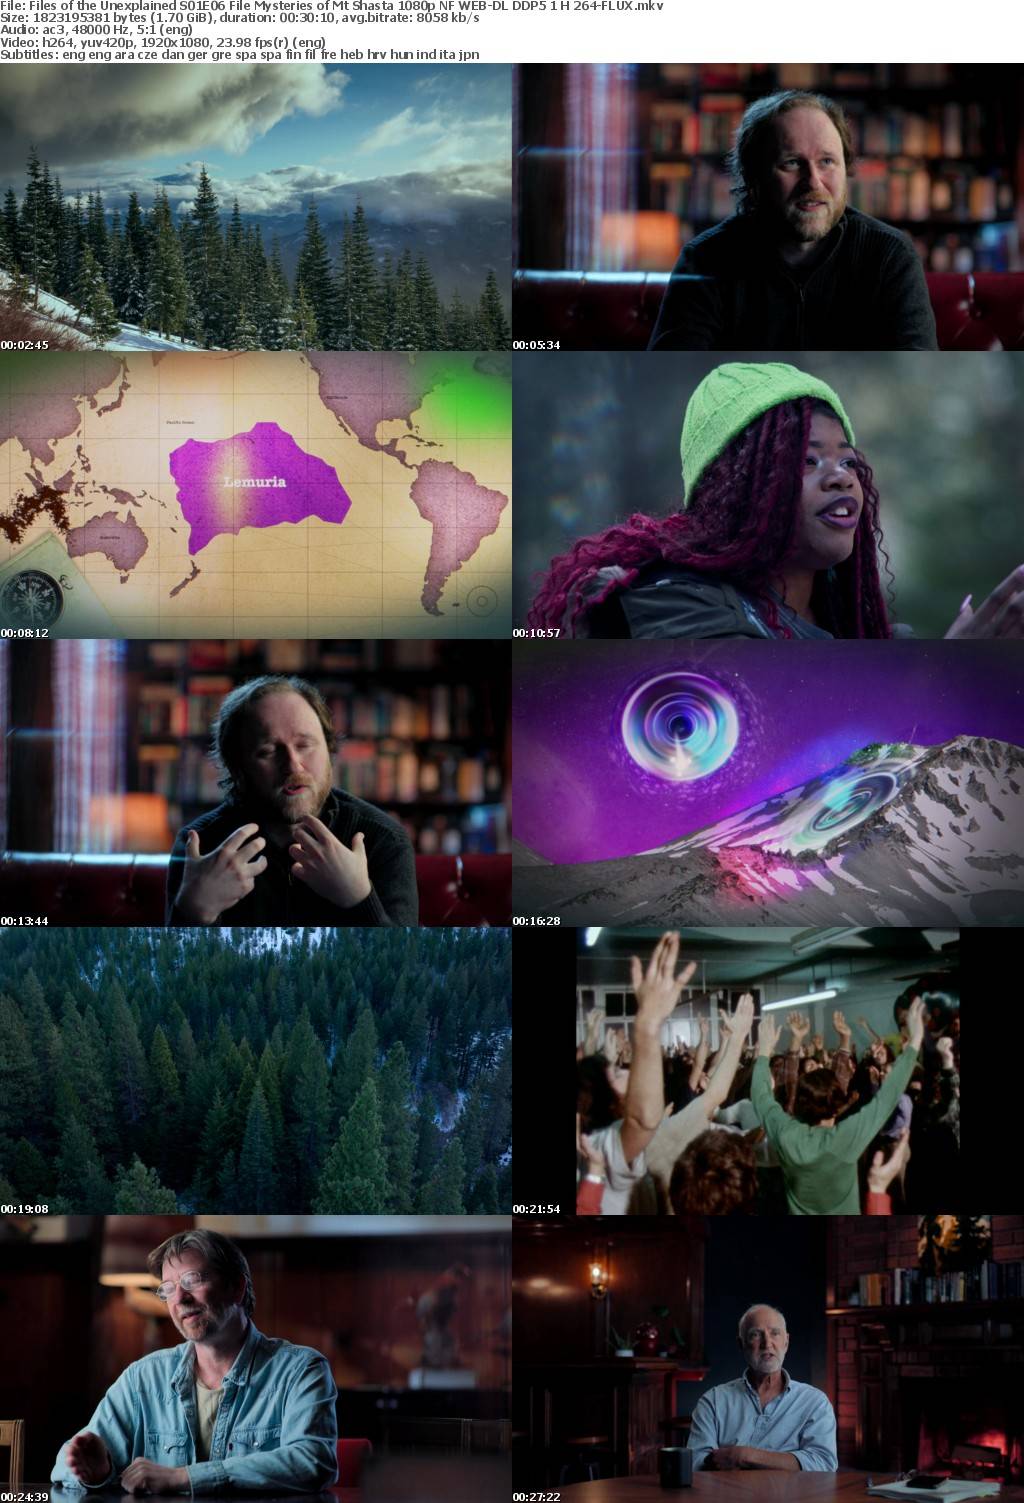 Files of the Unexplained S01E06 File Mysteries of Mt Shasta 1080p NF WEB-DL DDP5 1 H 264-FLUX